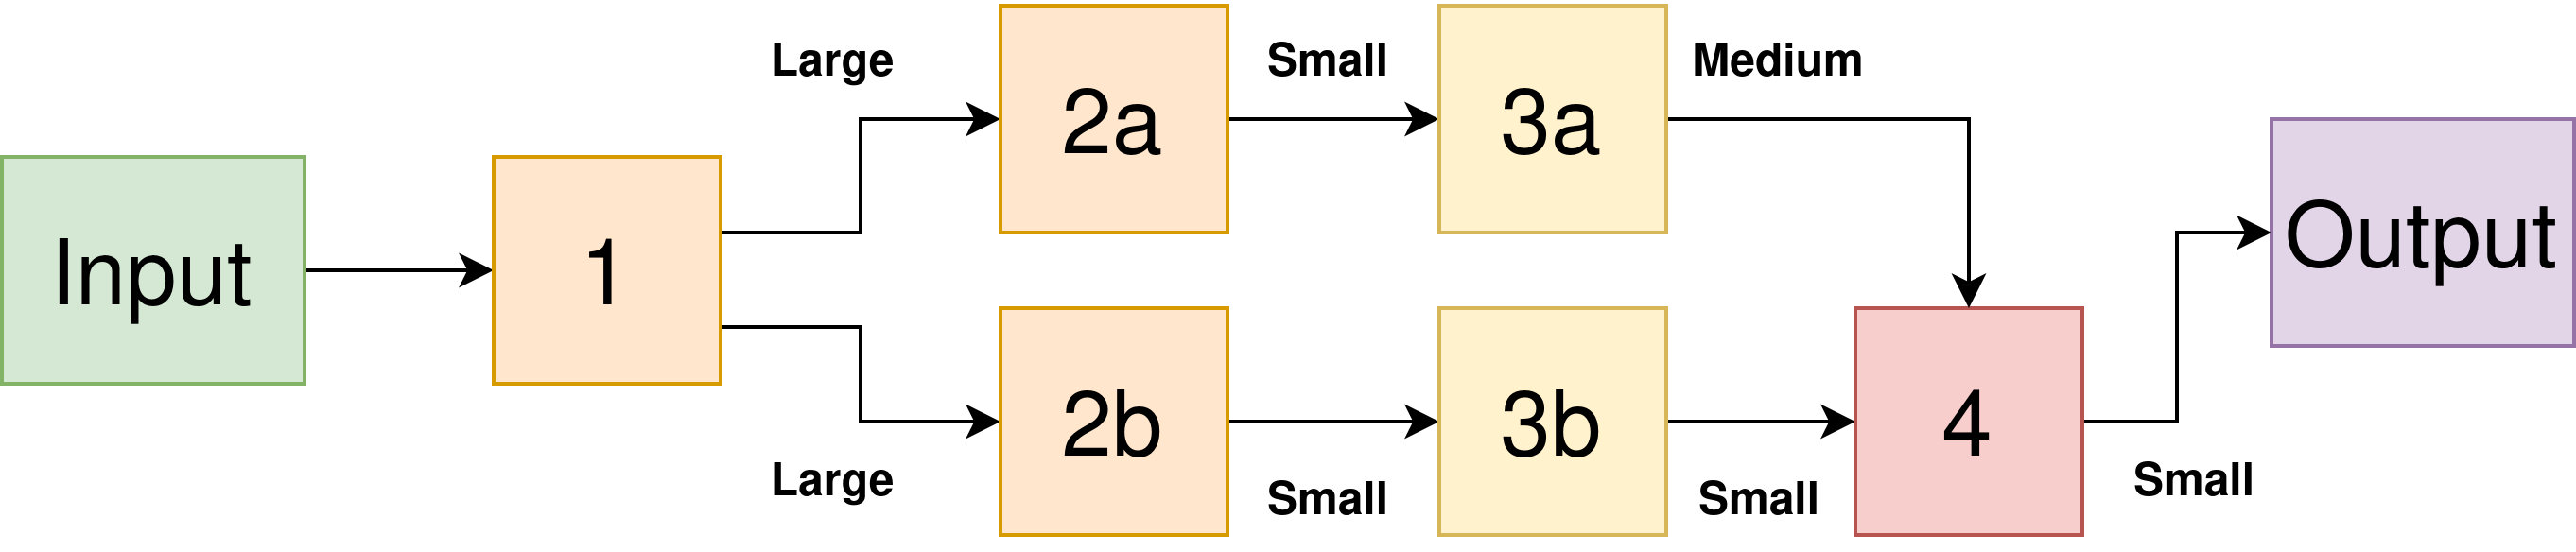 Diagram showing a branched DNN with activation maps of various sizes